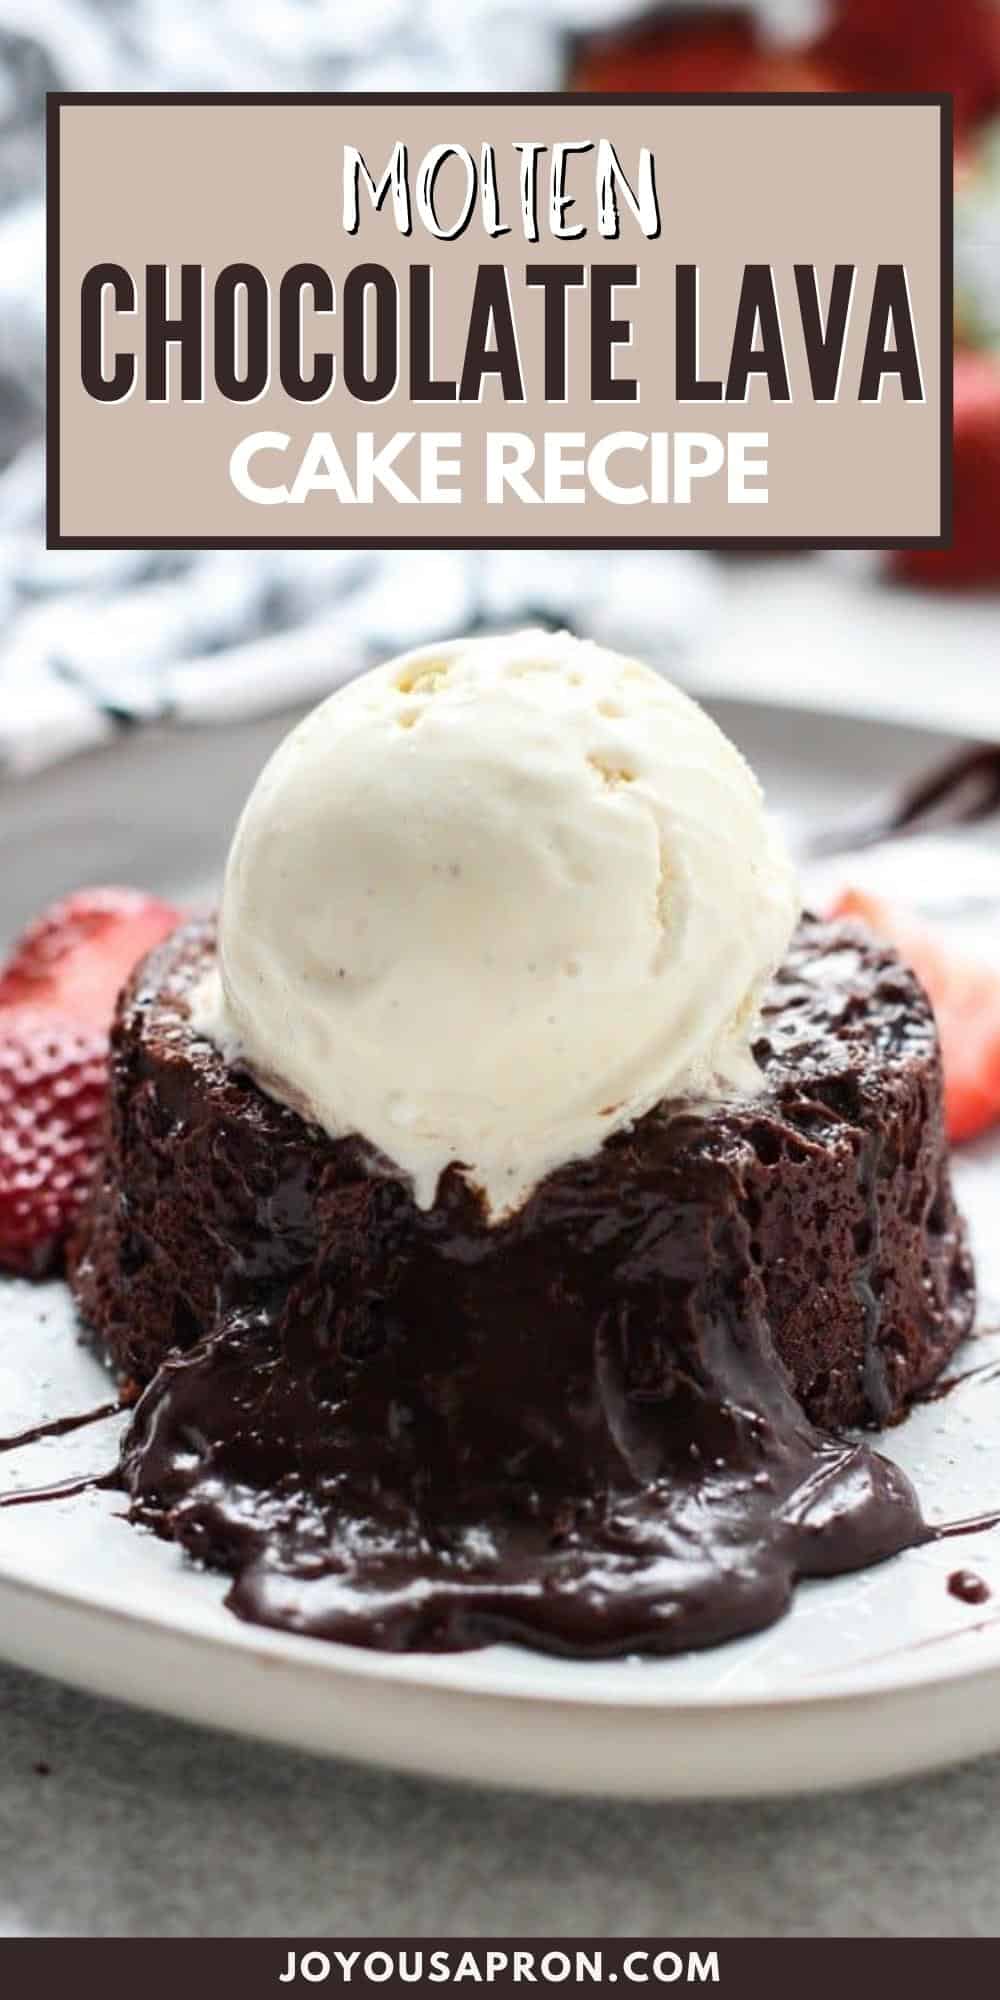 Molten Chocolate Lava Cake - elegant and delicious dessert for Valentine's Day. Warm, rich, decadent chocolate cake with a gooey lava filling in the middle, topped with vanilla ice cream. via @joyousapron